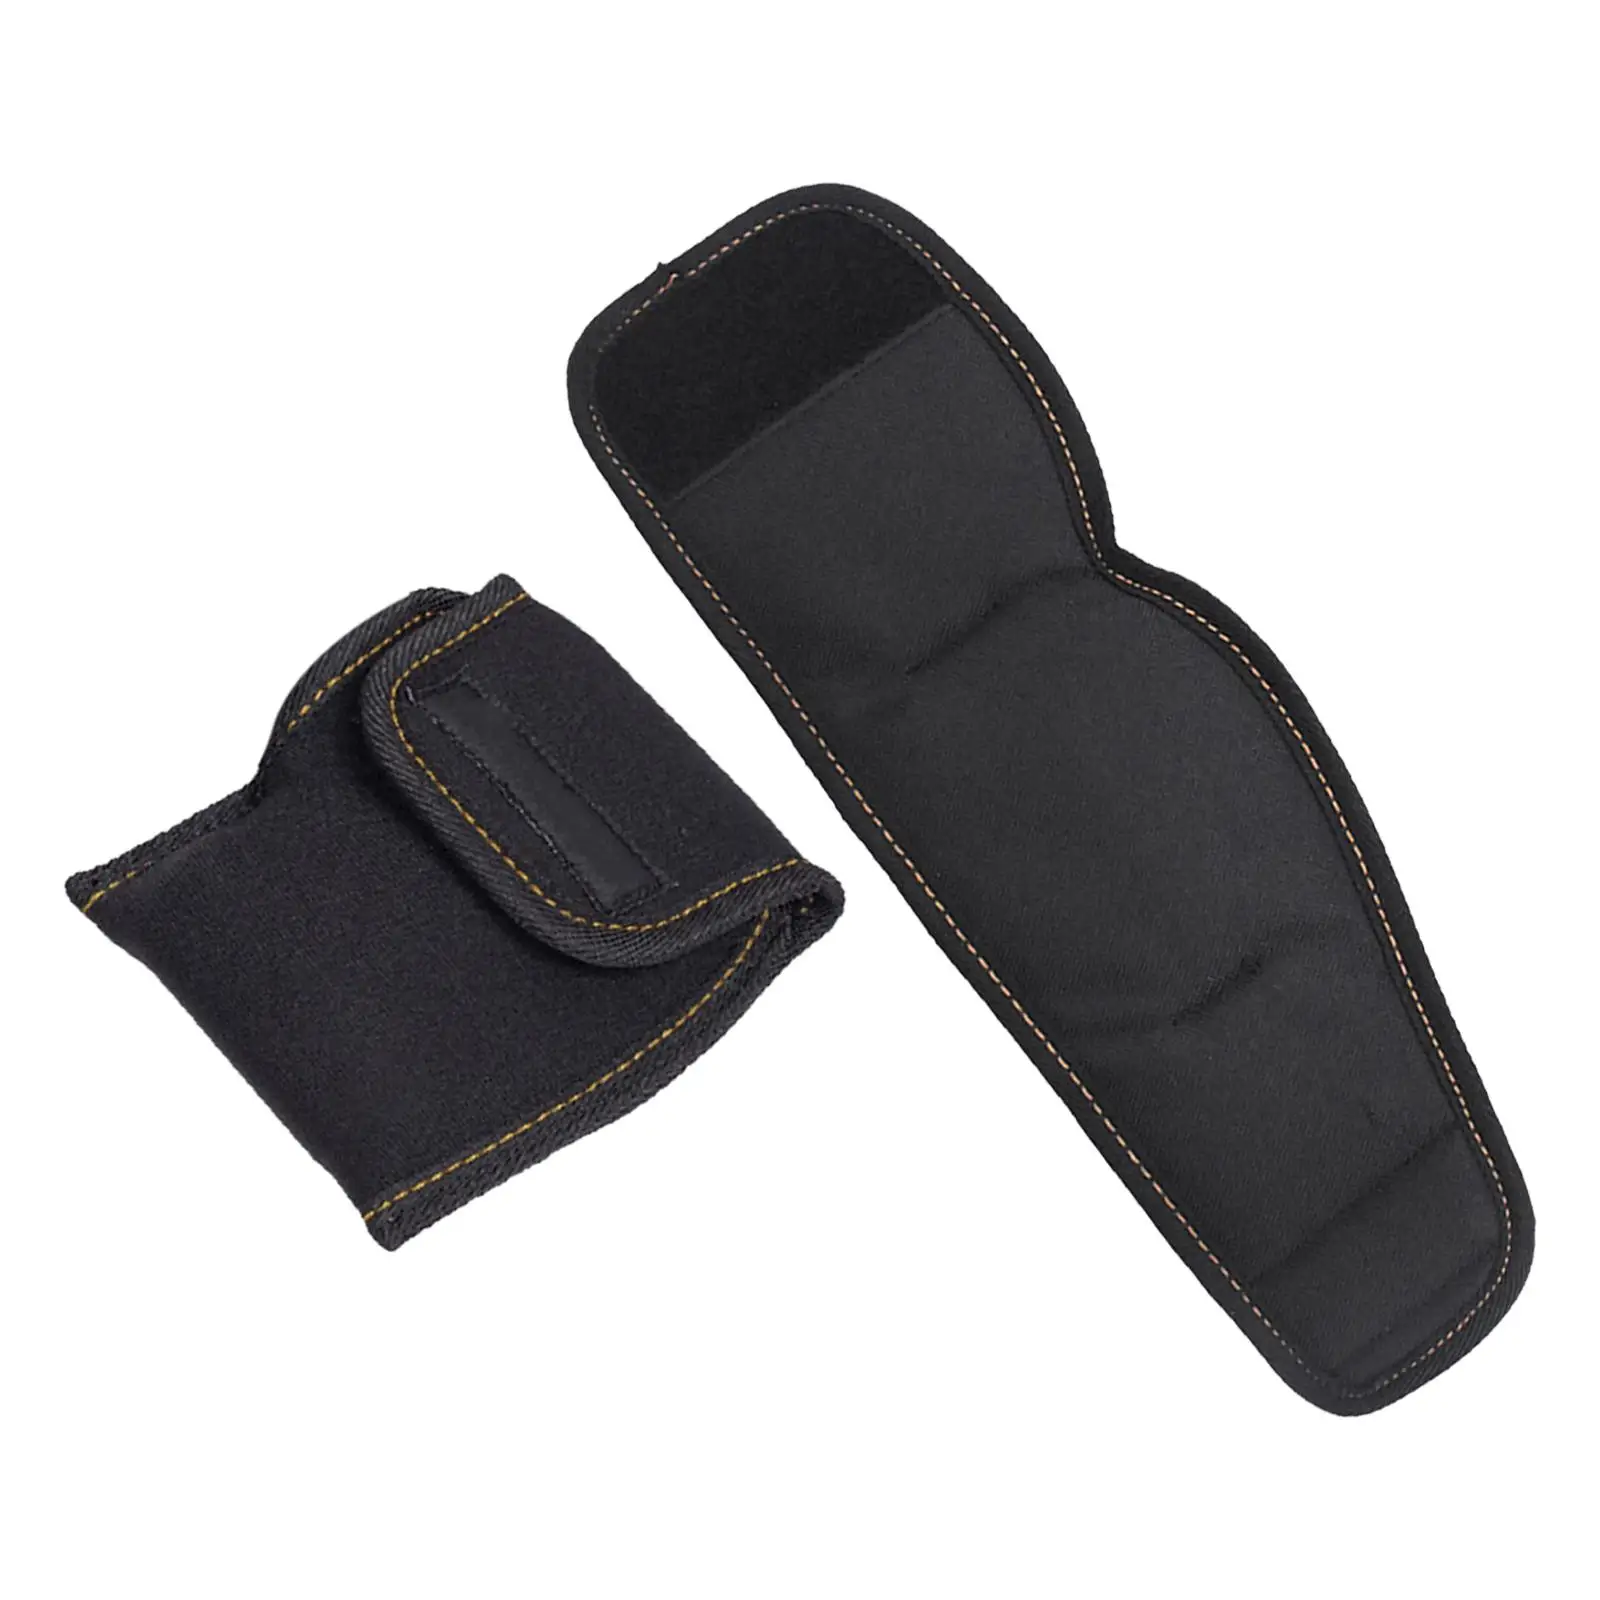 1 Pair Bike Pedal Protective Cover Oxford Cloth Replacement Cleat Sleeves for Mountain Bike